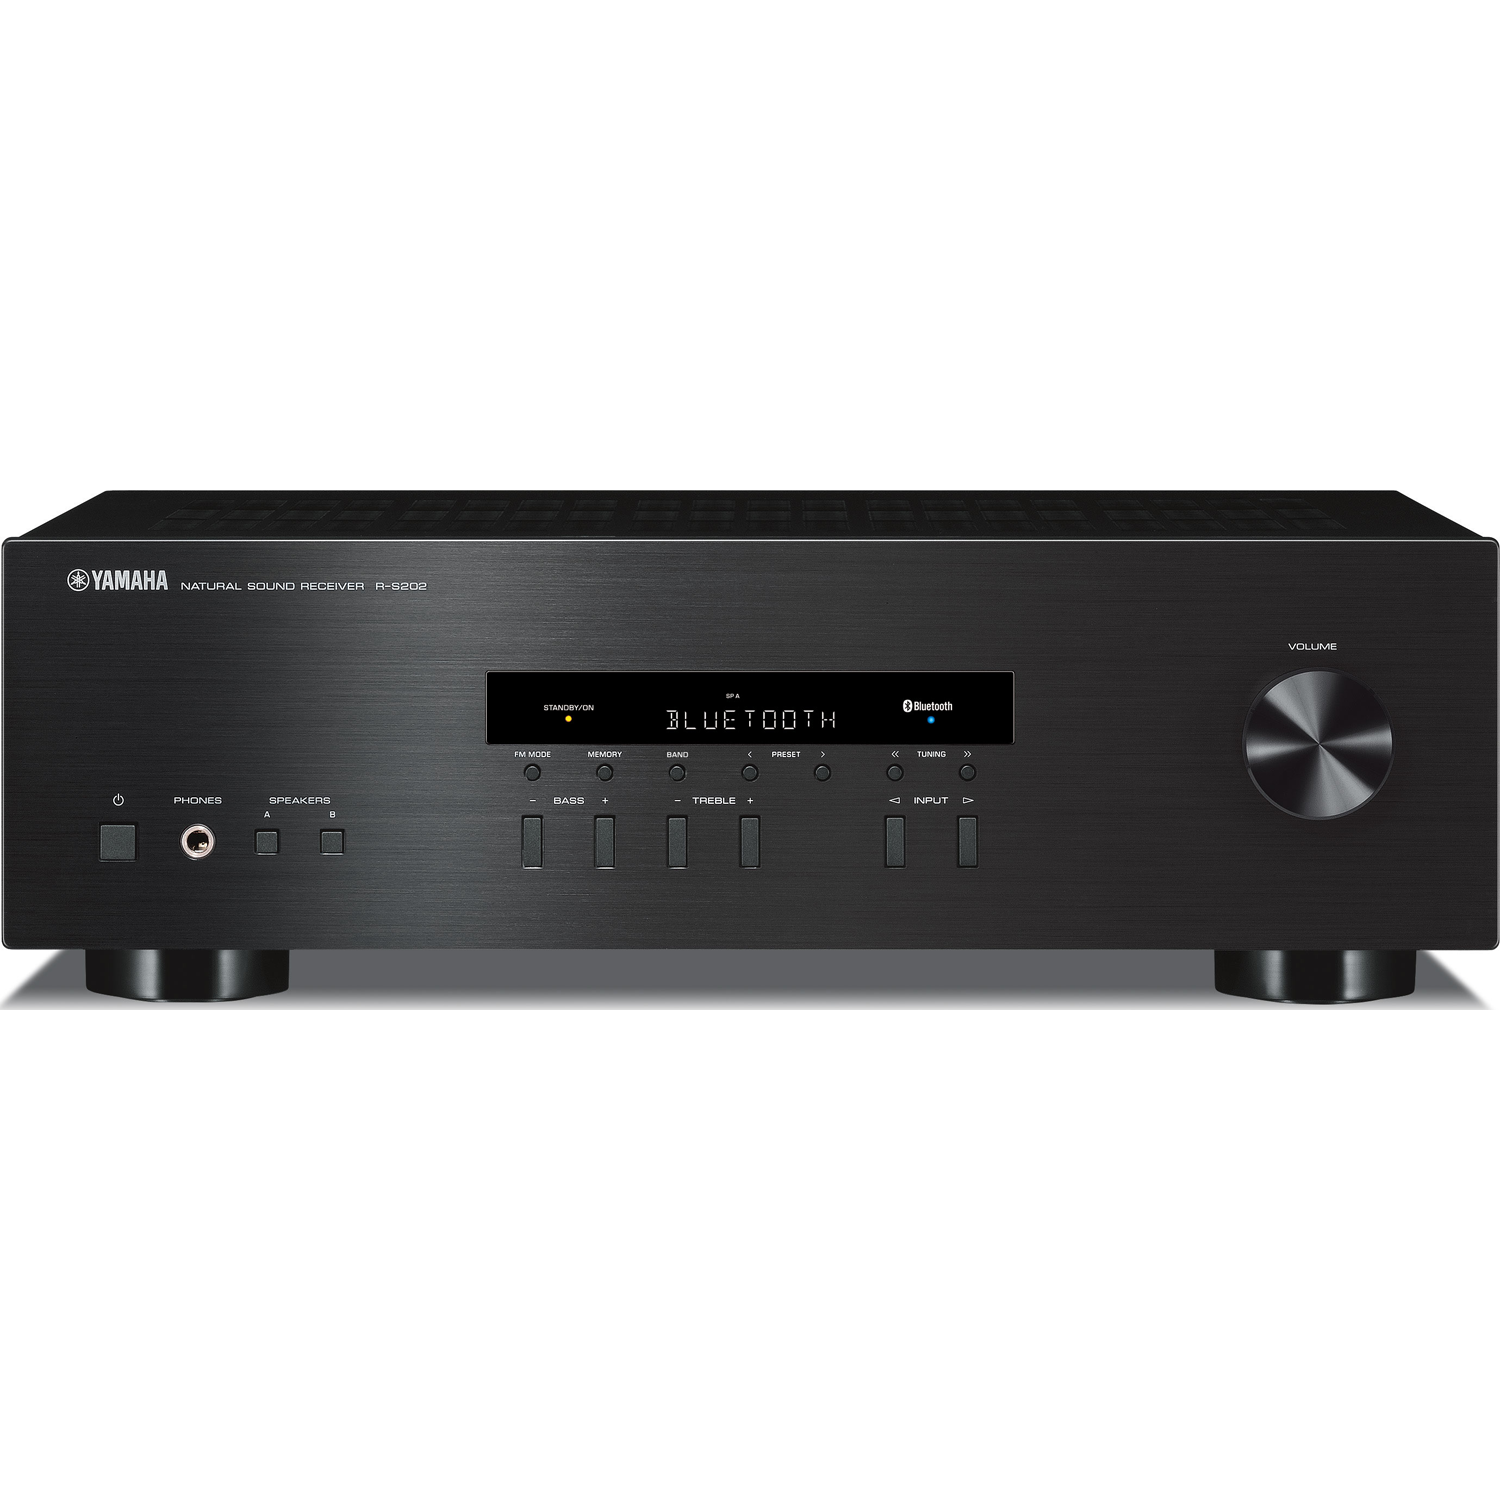 (Factory Refurbished) Yamaha R-S202 Stereo Receiver $99.99 + Free Shipping @ Accessories4Less